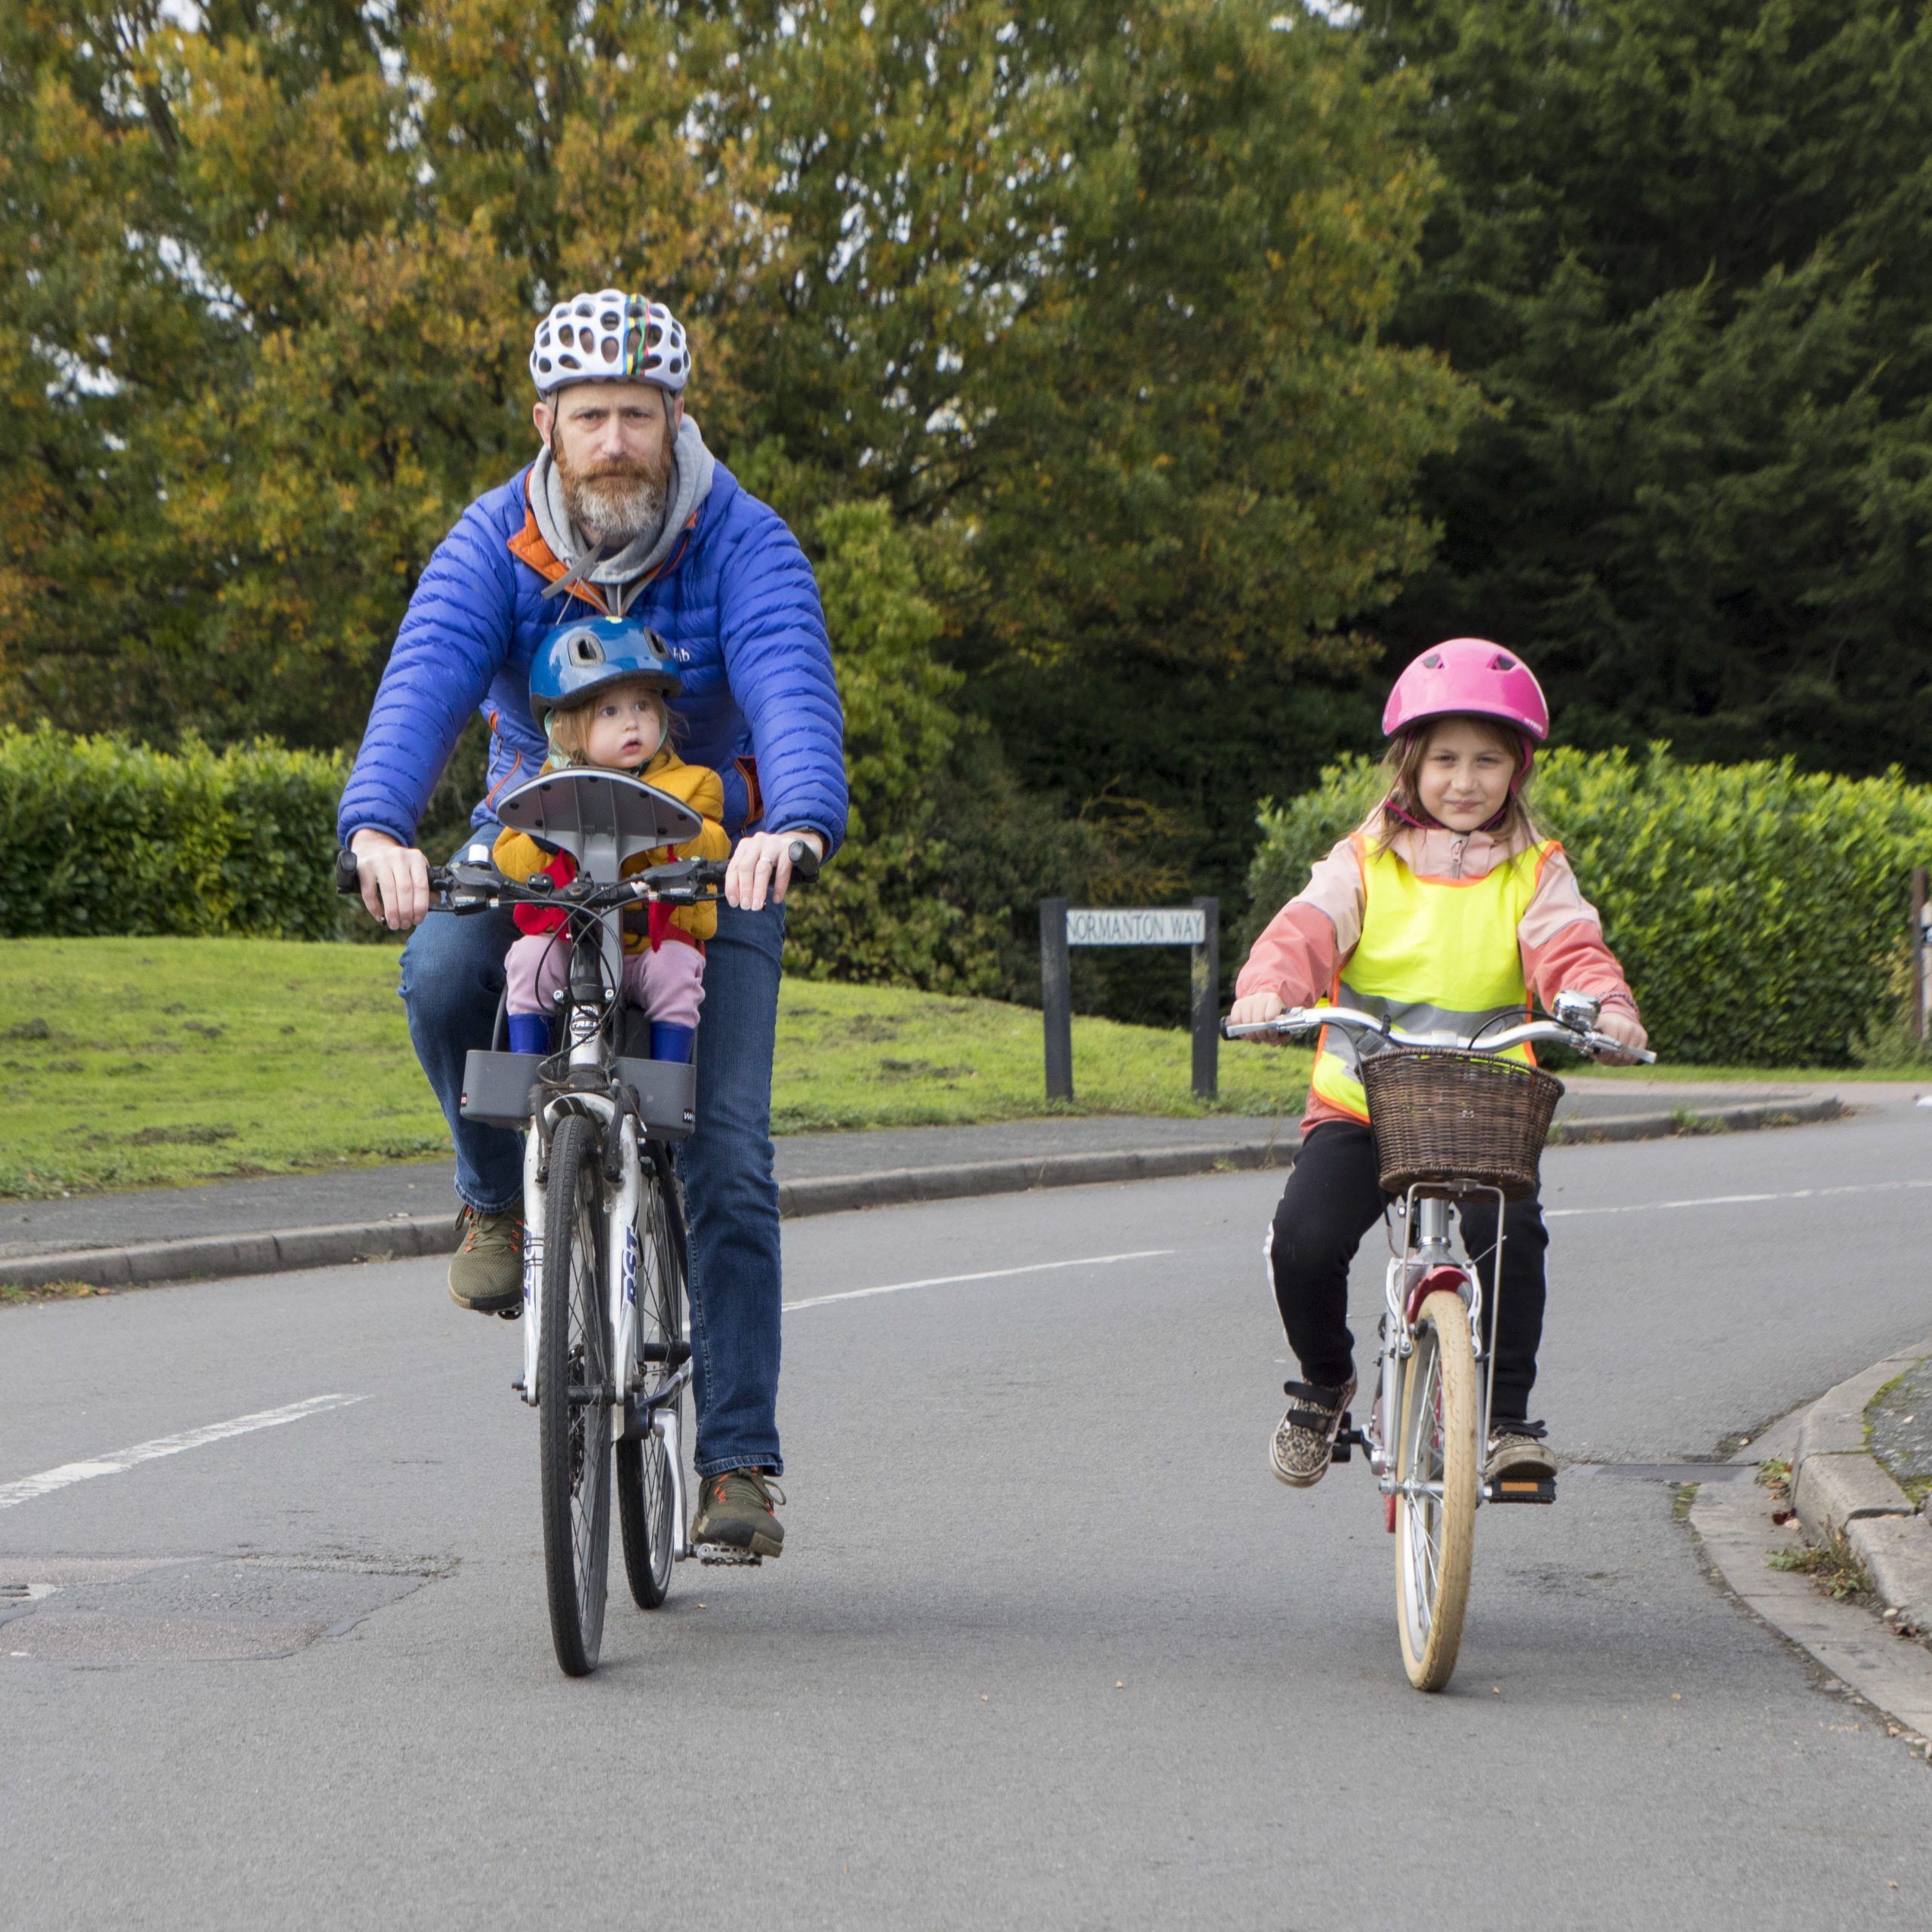 A man in a blue jacket and grey helmet rides a bike towards the camera. A toddler is sat in a handlebar seat in front of him. To his right is a young girl in a pink coat and helmet, riding a bike towards the camera.